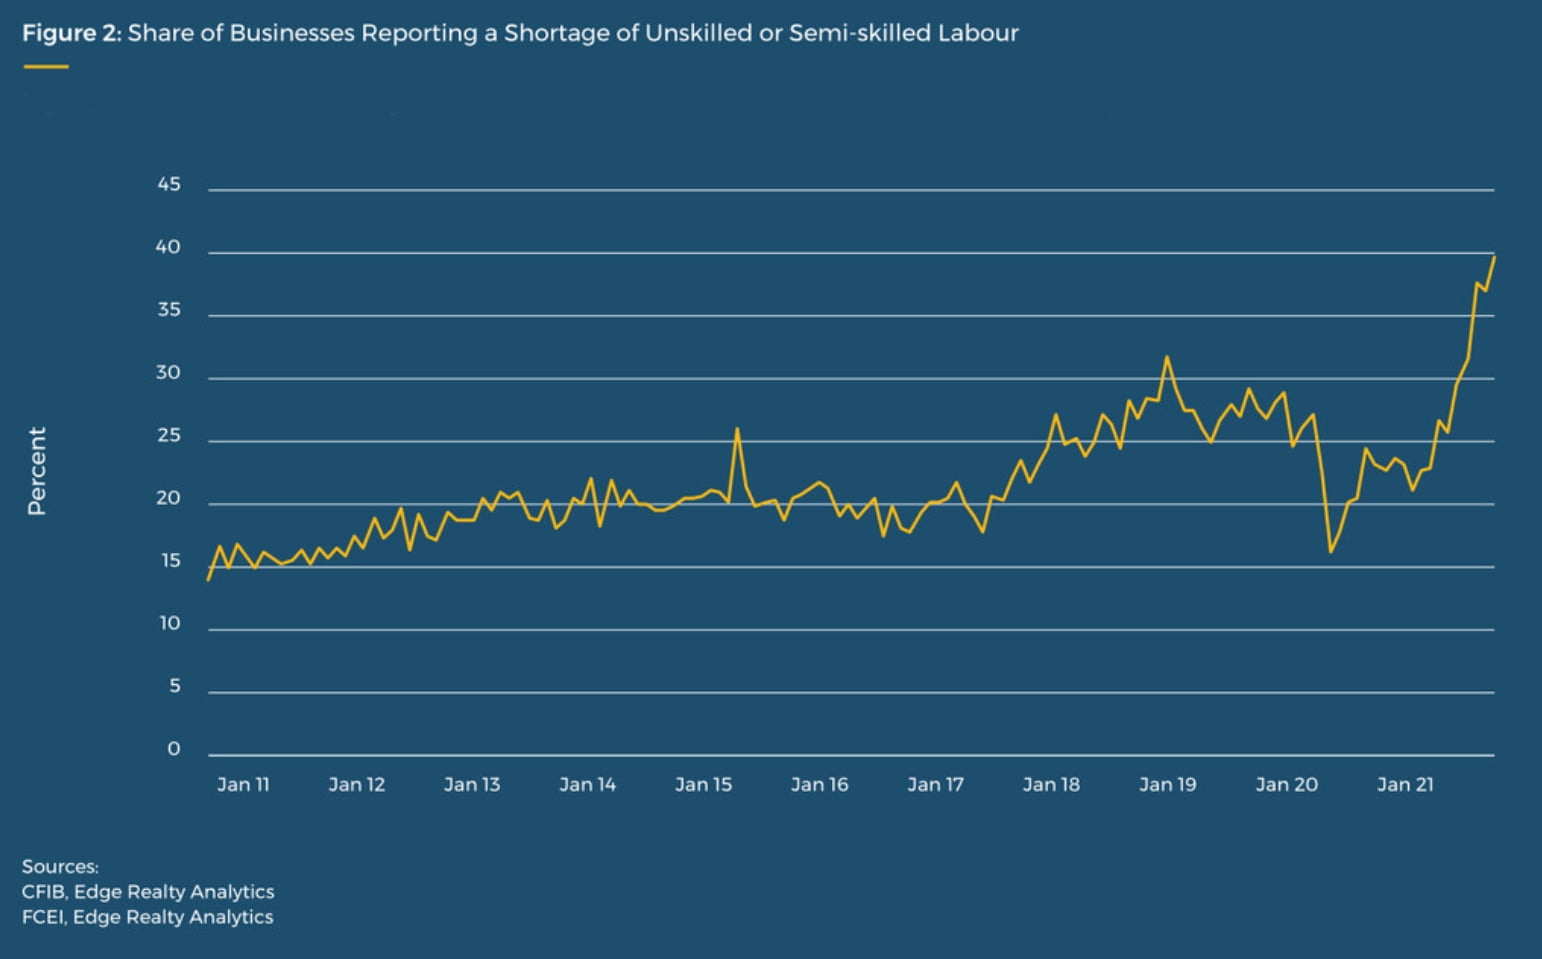 Share of businesses reporting labour shortages